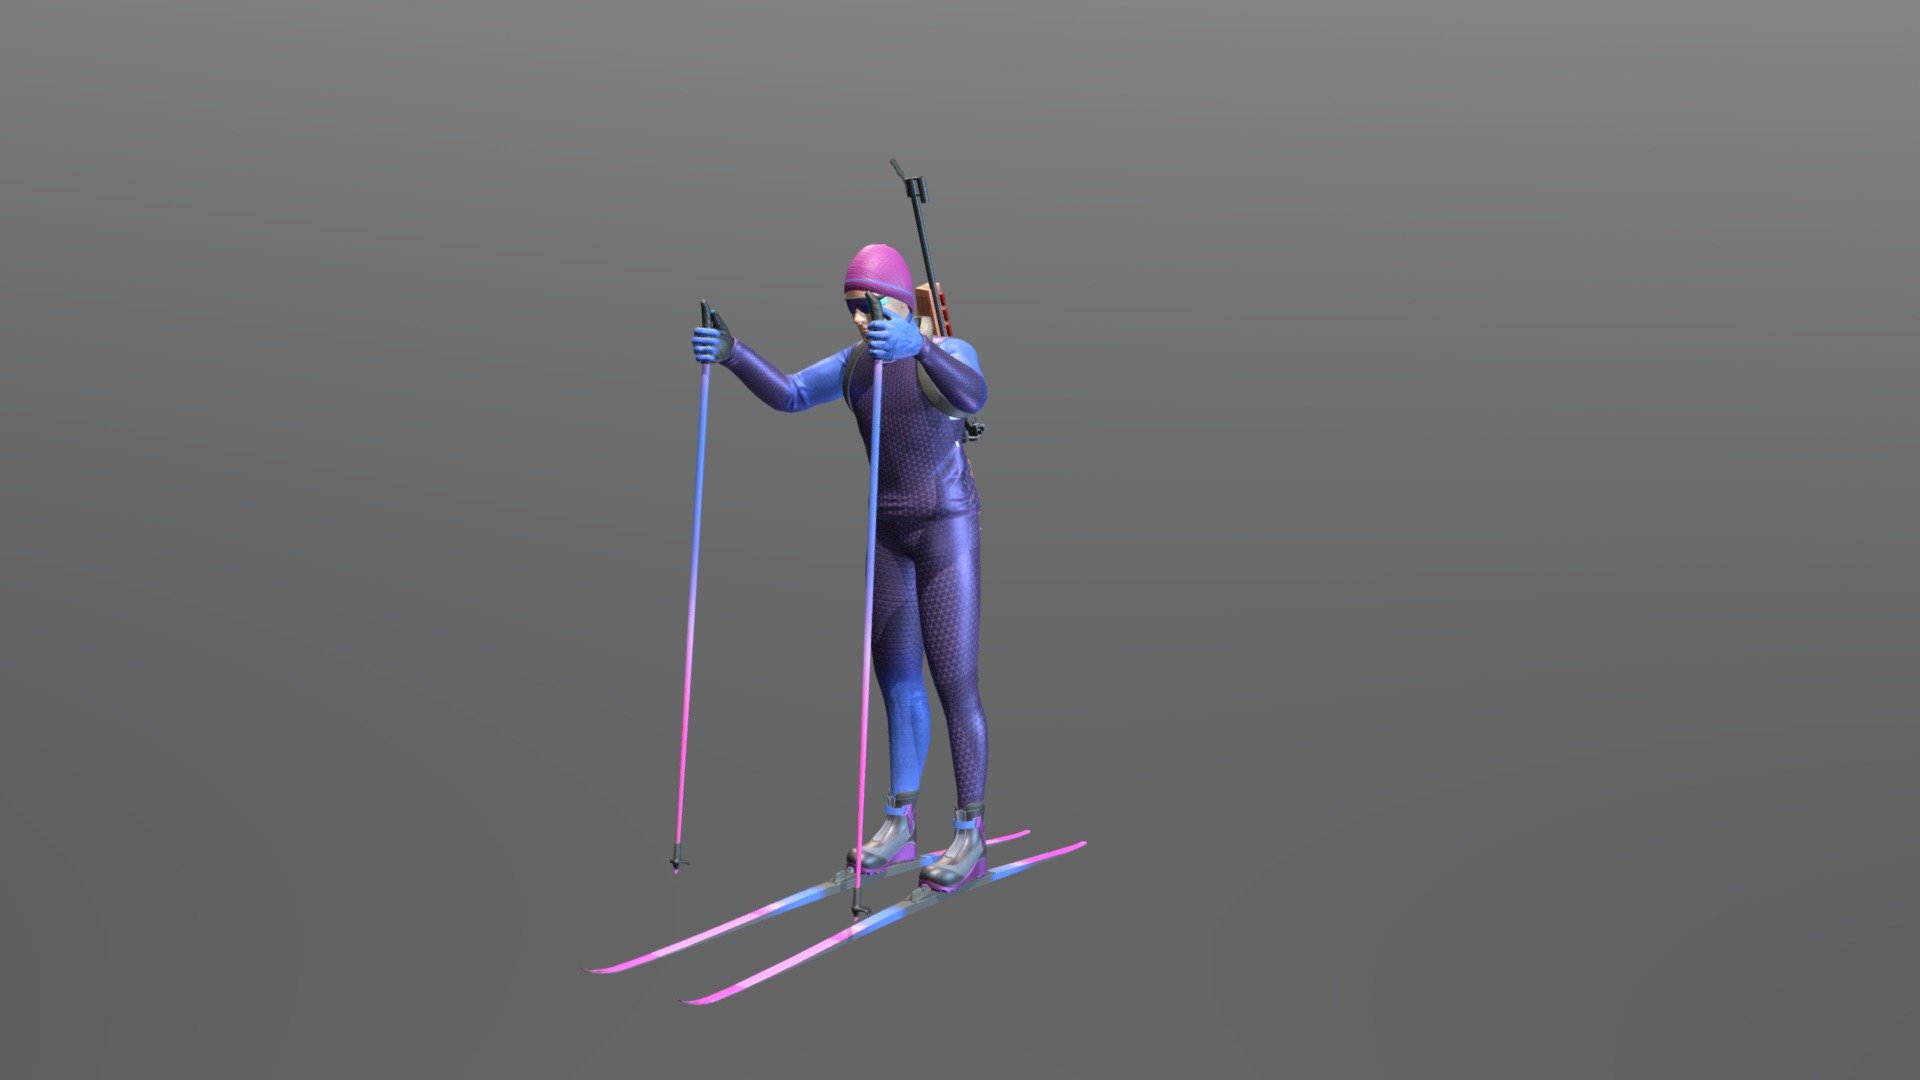 Skiing Charachter With Animation's

14 Animations
Skiing,
Skiing Front,
Skiing Left,
Skiing Right,
Skiing Up,
Skiing Down,
Skiing To Fire Station,
Fire,
Fire Idle,
Hide Weapon,
Show Weapon,
Idle Stand,

*9 Skin Variation 

Base,
Normal,
Height,
Roughness, - Skiing Charachter - 3D model by Edgar Margaryan (@edgarmargaryan) 3d model